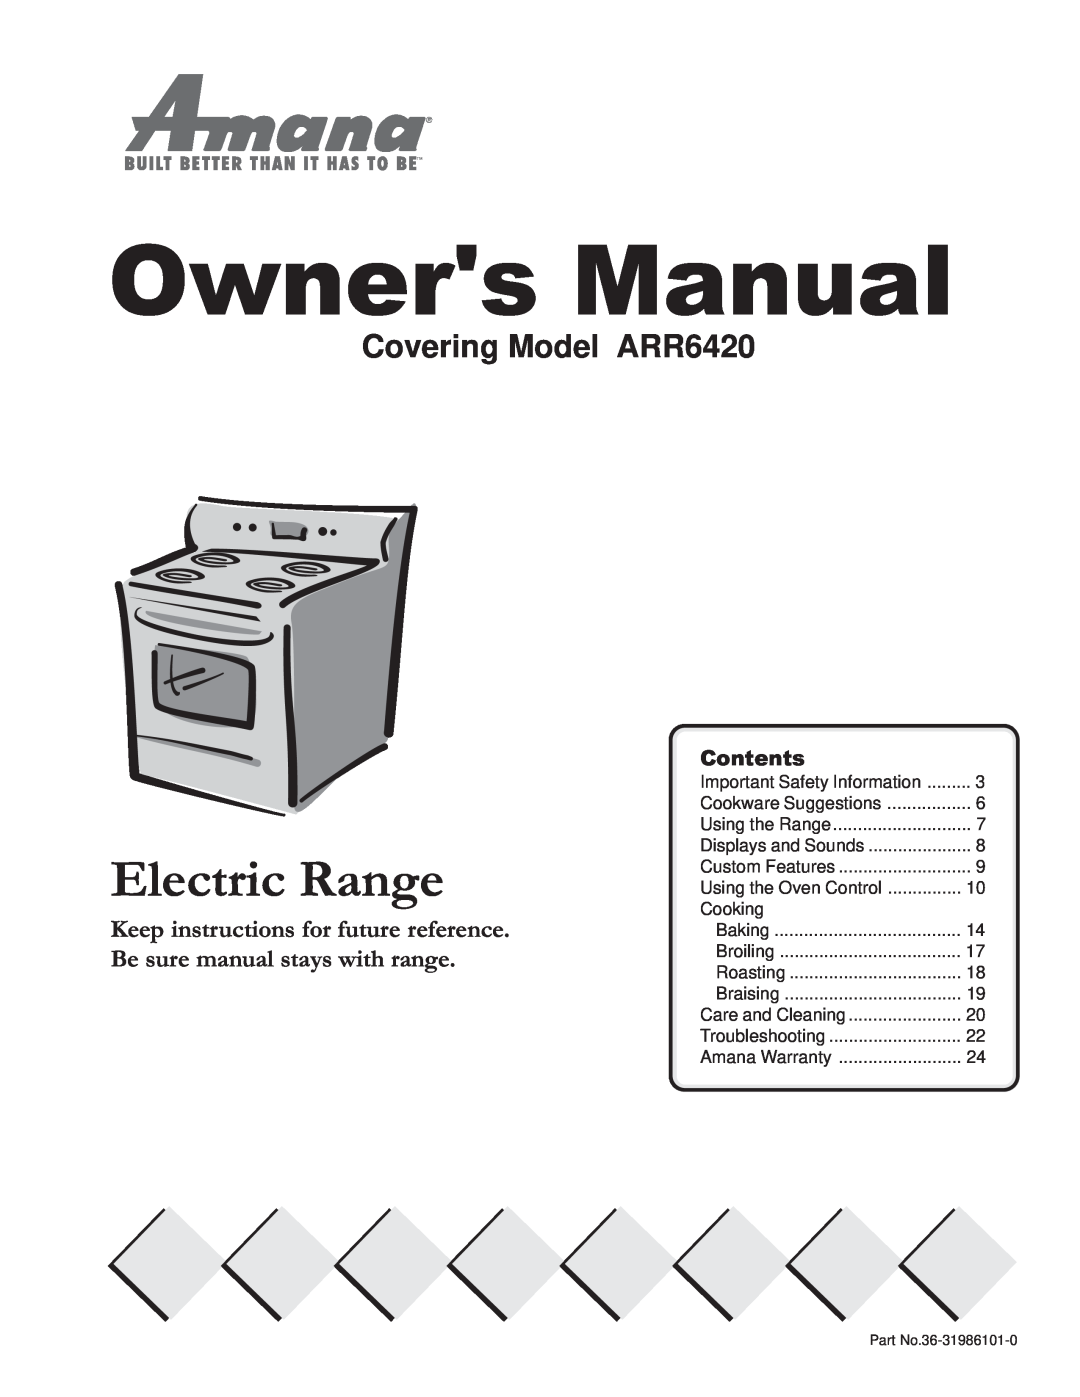 Amana owner manual Contents, Electric Range, Covering Model ARR6420 